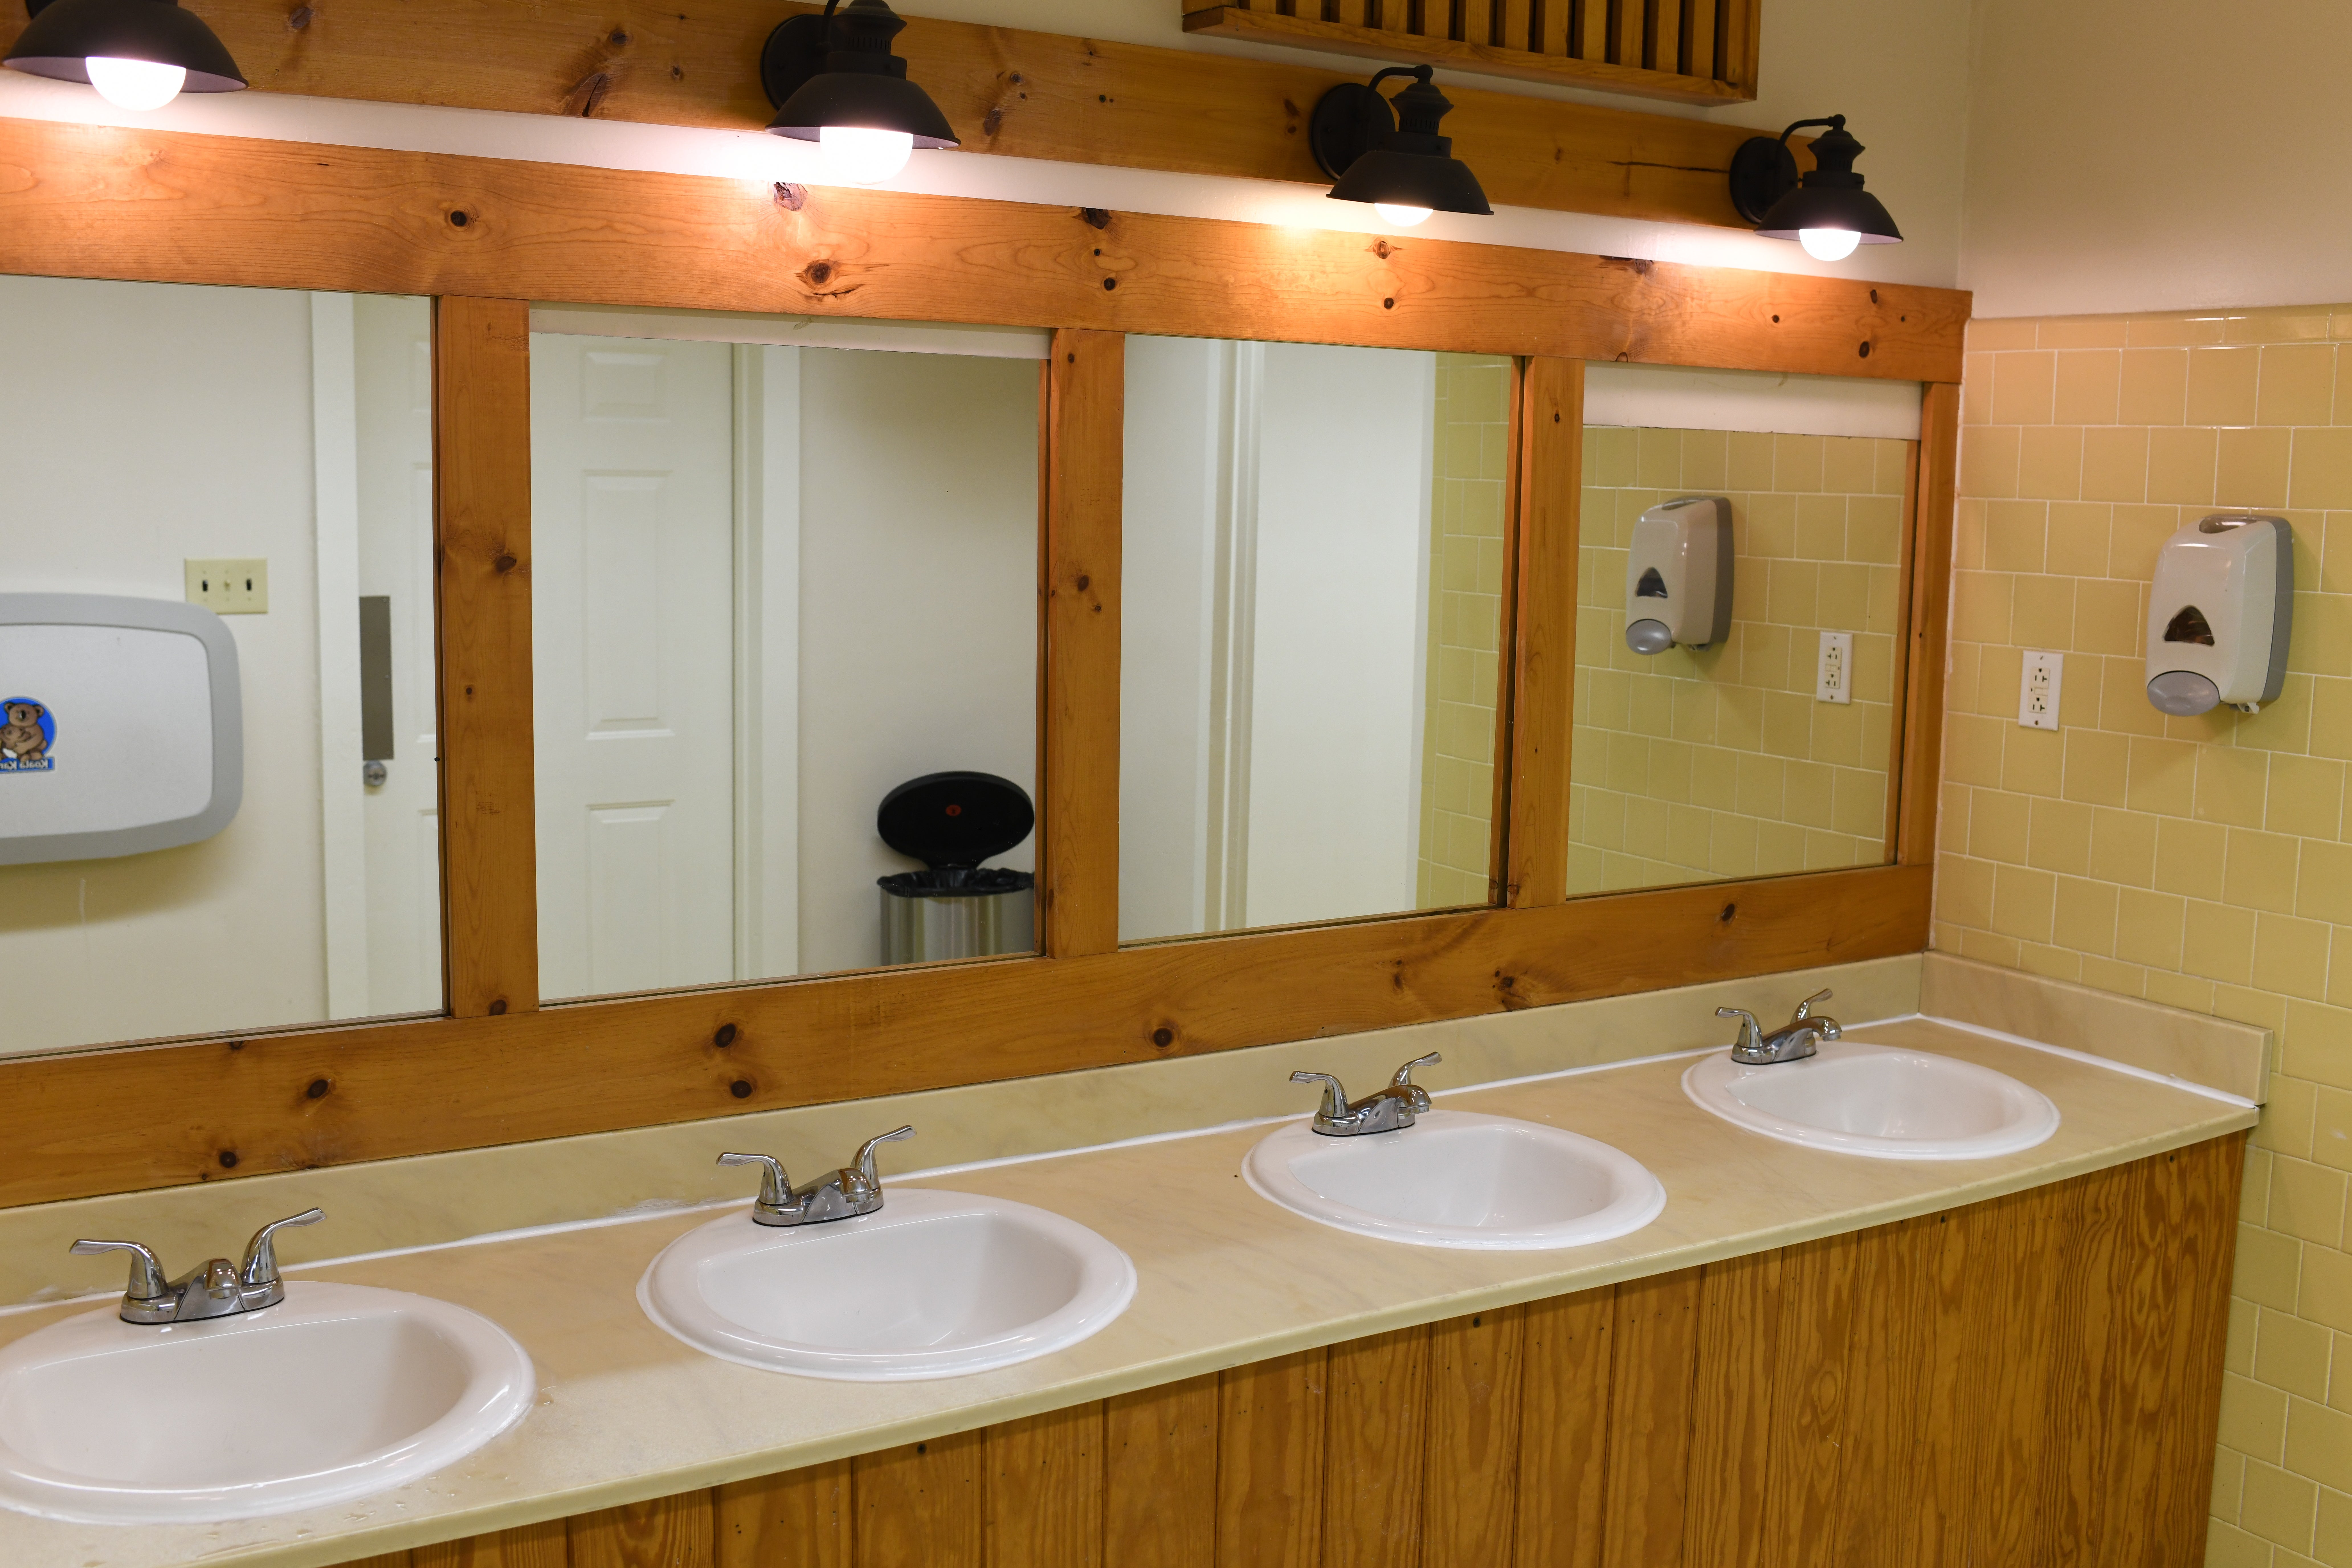 Bathrooms were well maintained and odor free.